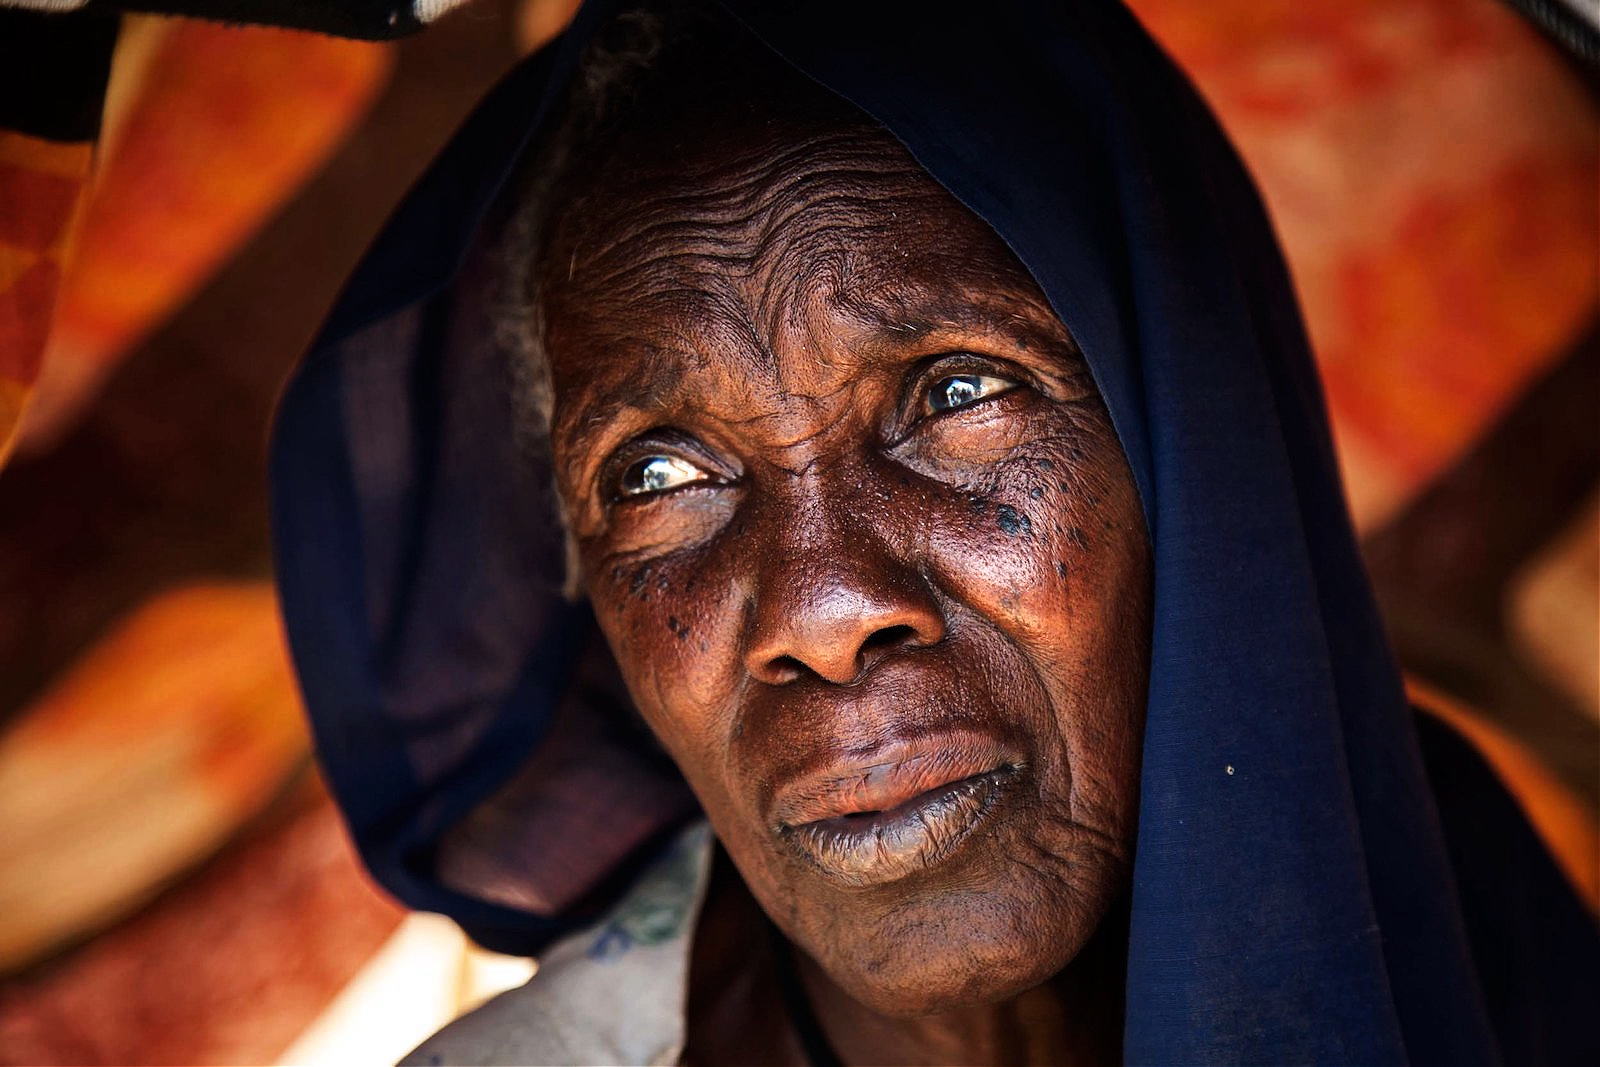 A Sudanese woman displaced by fighting in South Darfur in 2014